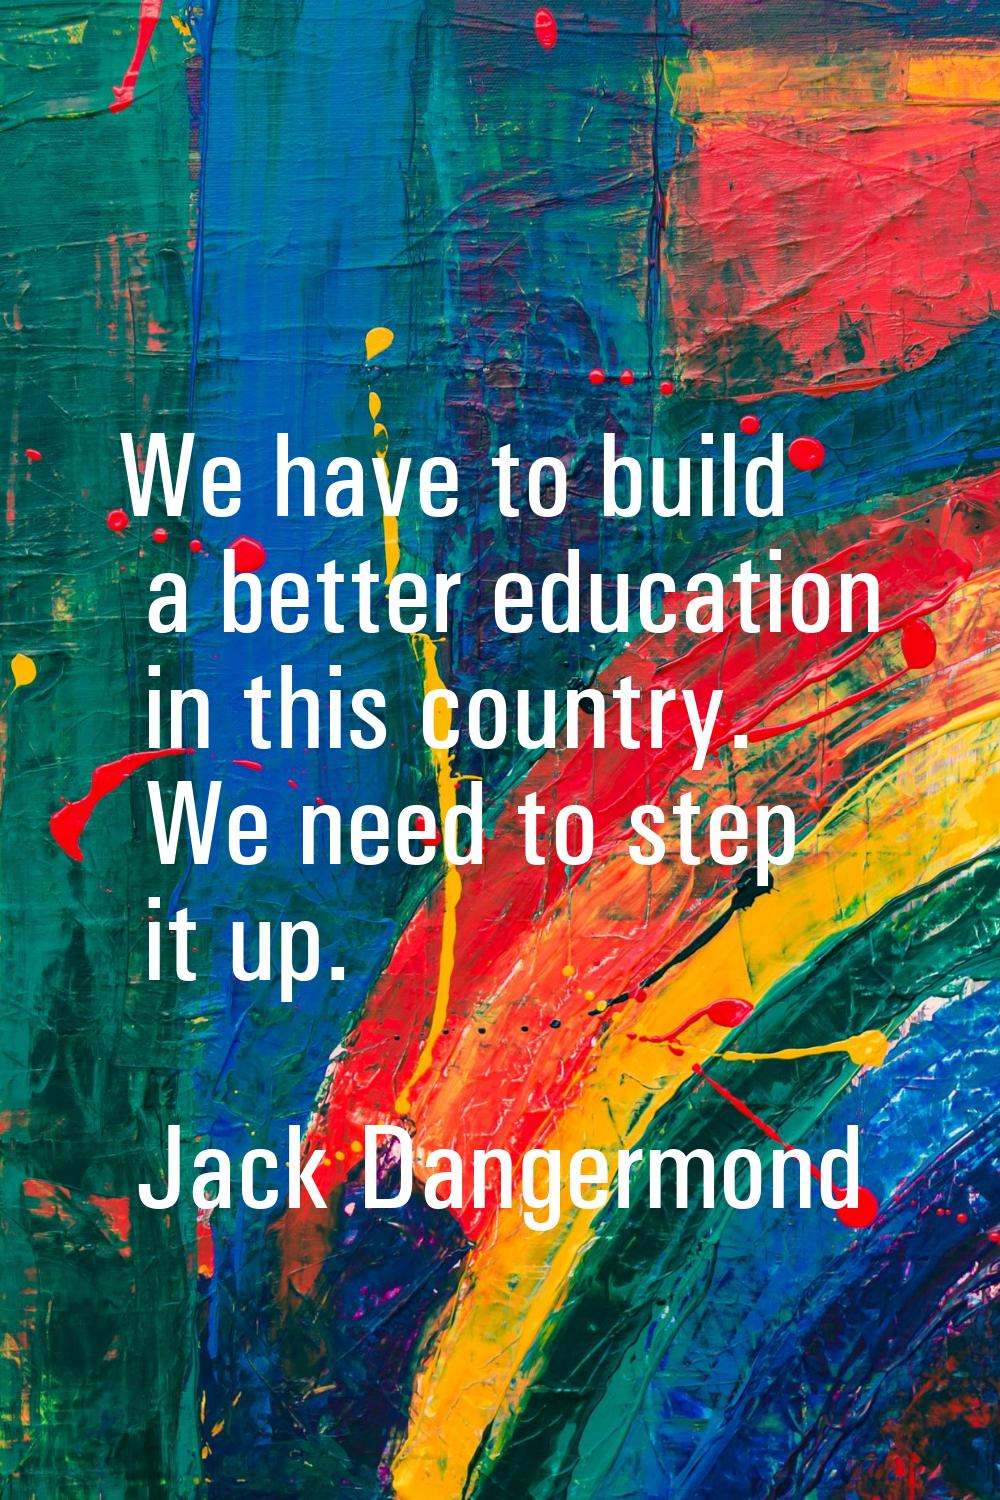 We have to build a better education in this country. We need to step it up.